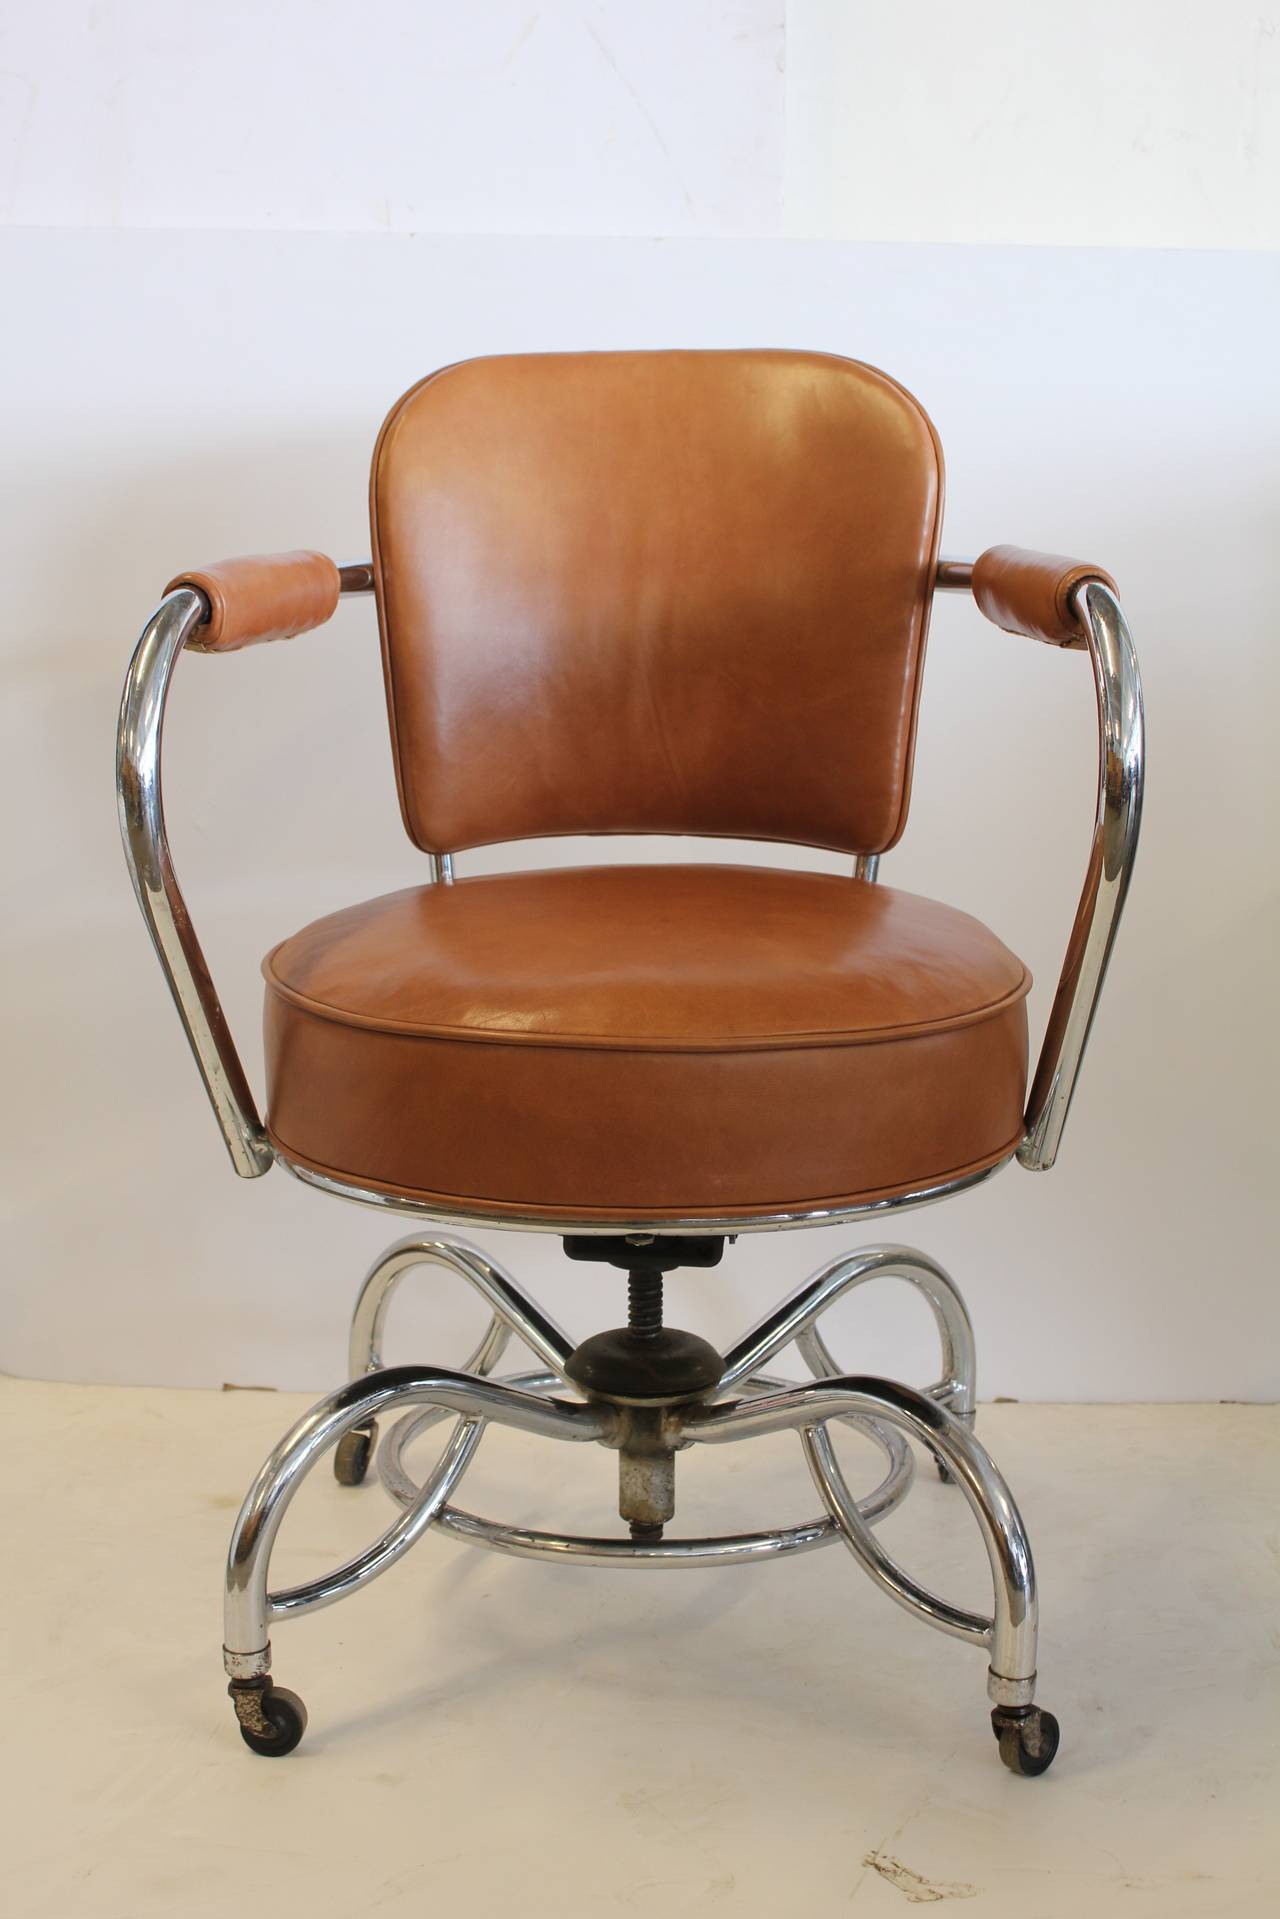 Stylish Art Deco Leather and Chrome Desk Chair at 1stdibs